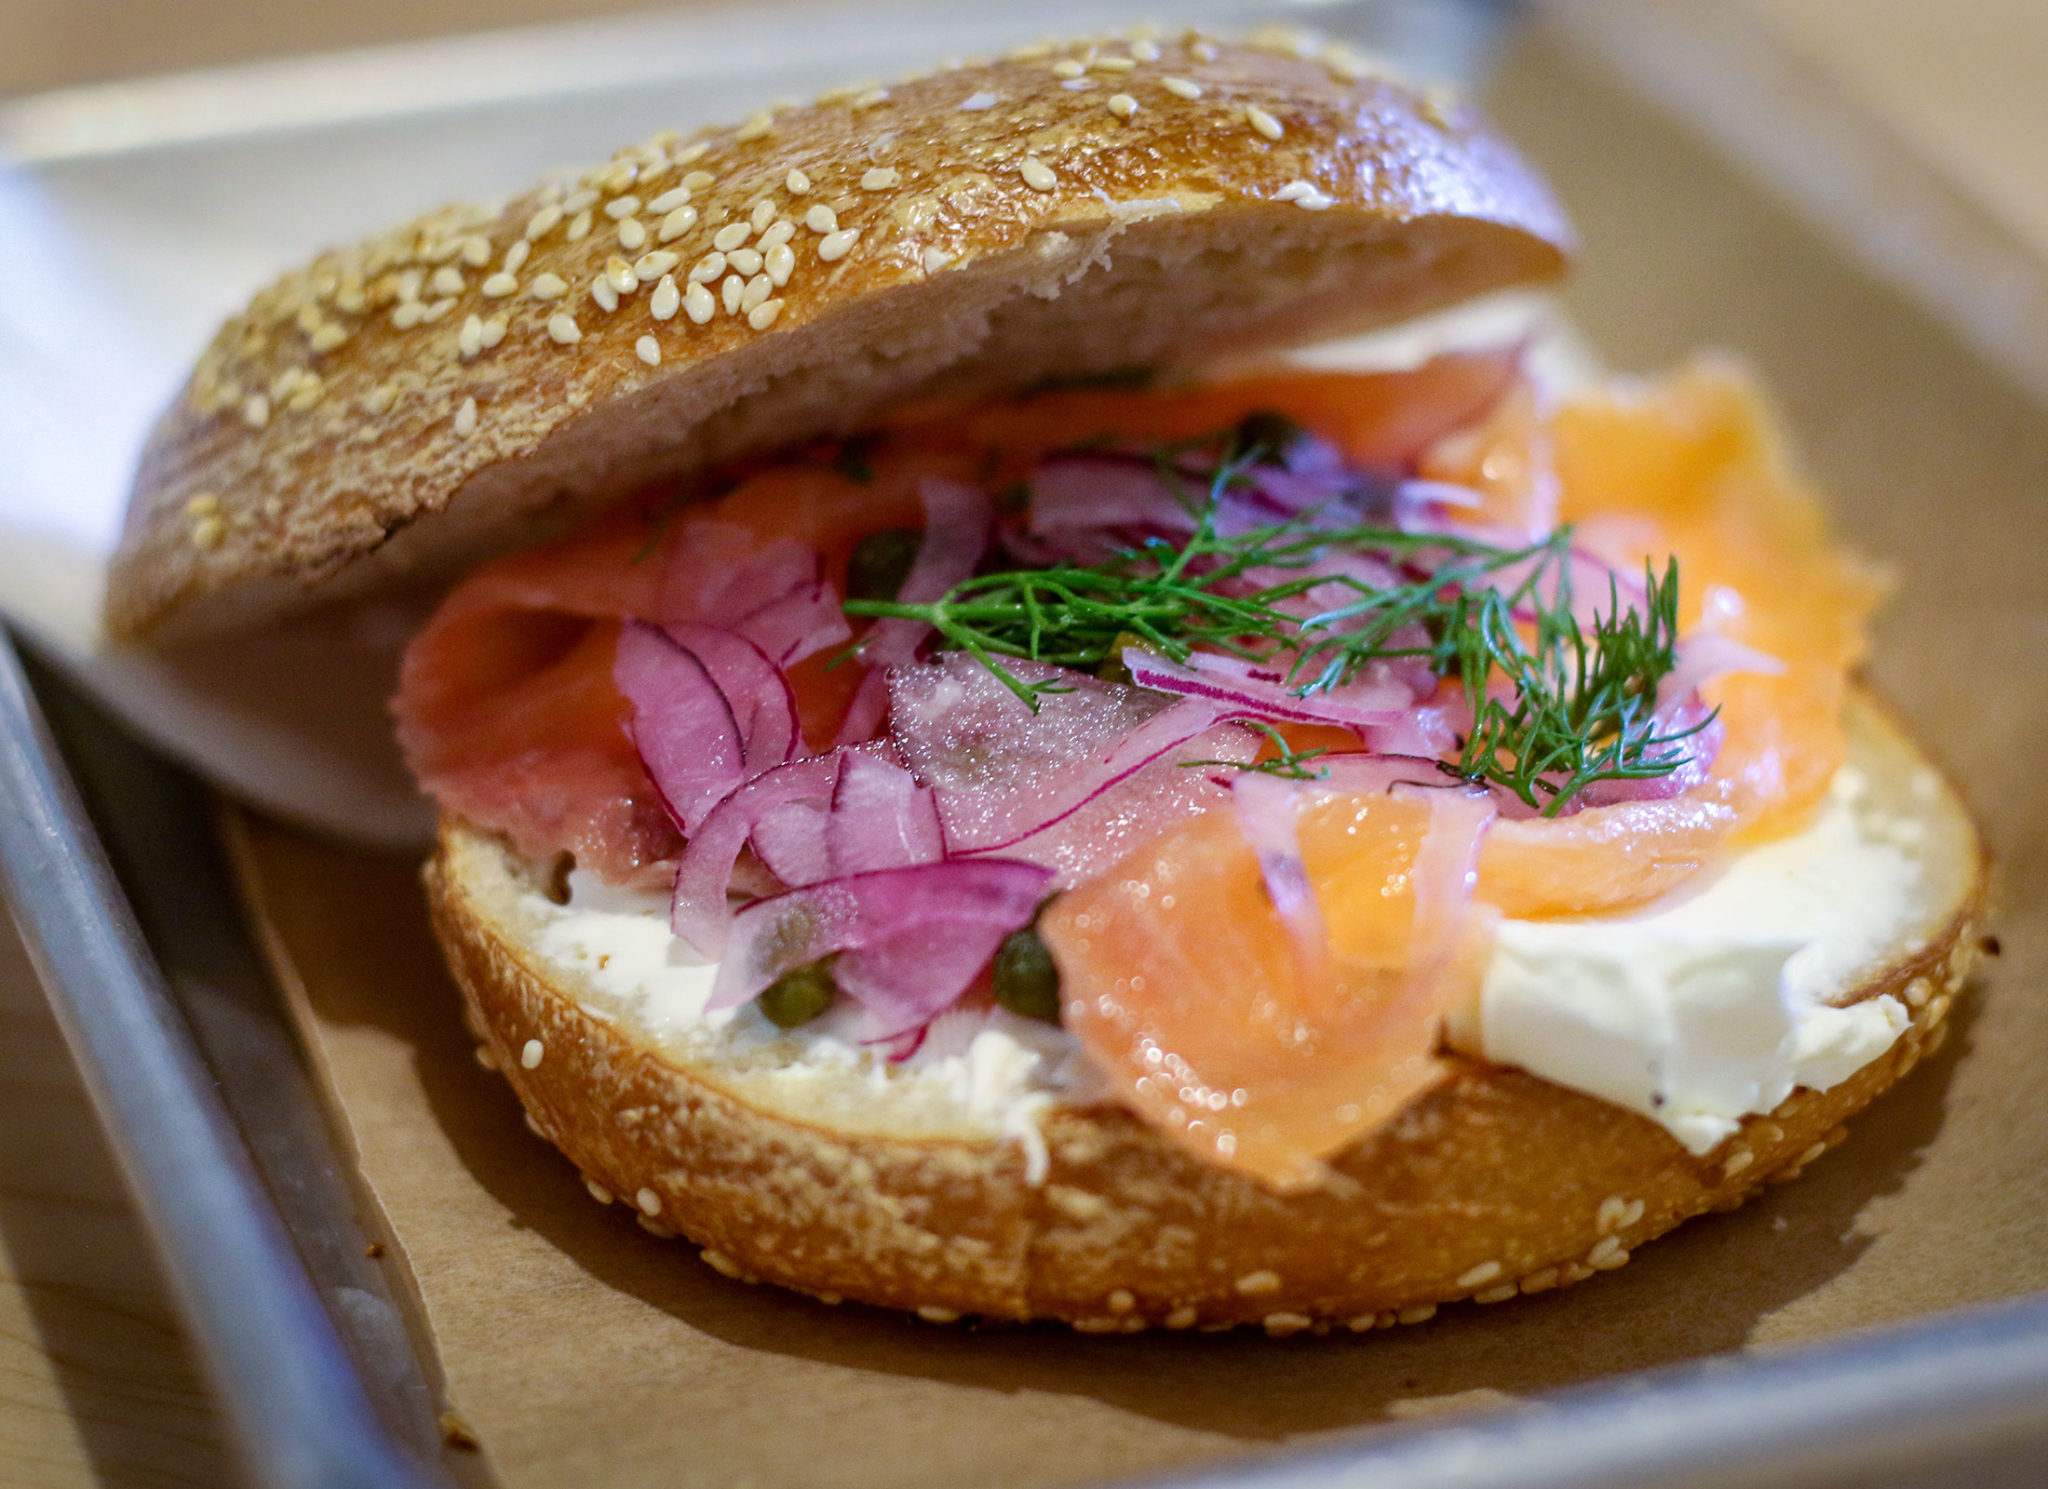 Lox and cream cheese sesame bagel at the Bagel Mill in Petaluma. Heather Irwin/PD